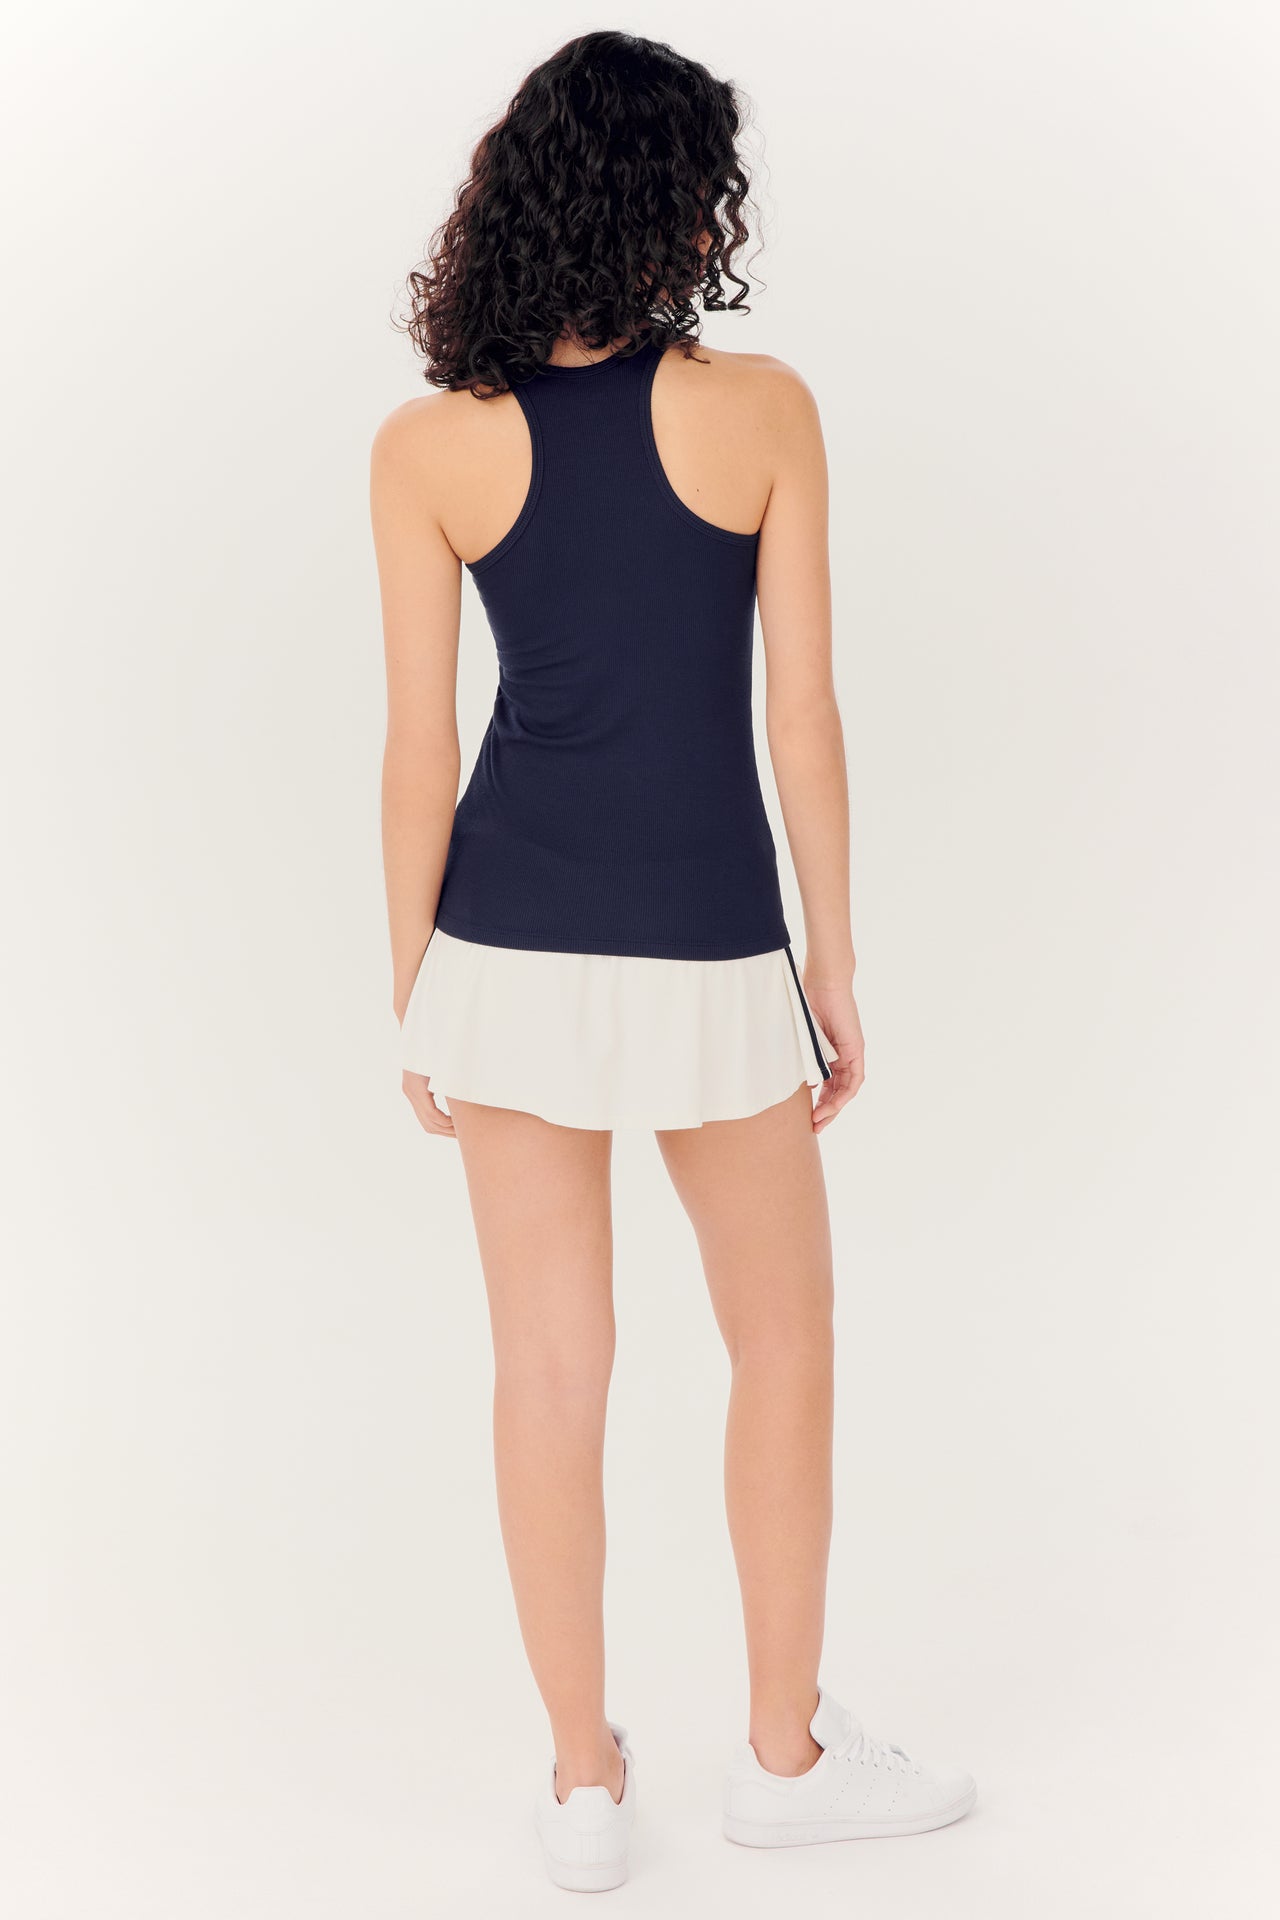 Woman from behind wearing a navy blue tank top made of SPLITS59 Airweight fabric and Ella Airweight Skort - White/Indigo with sneakers against a white background.